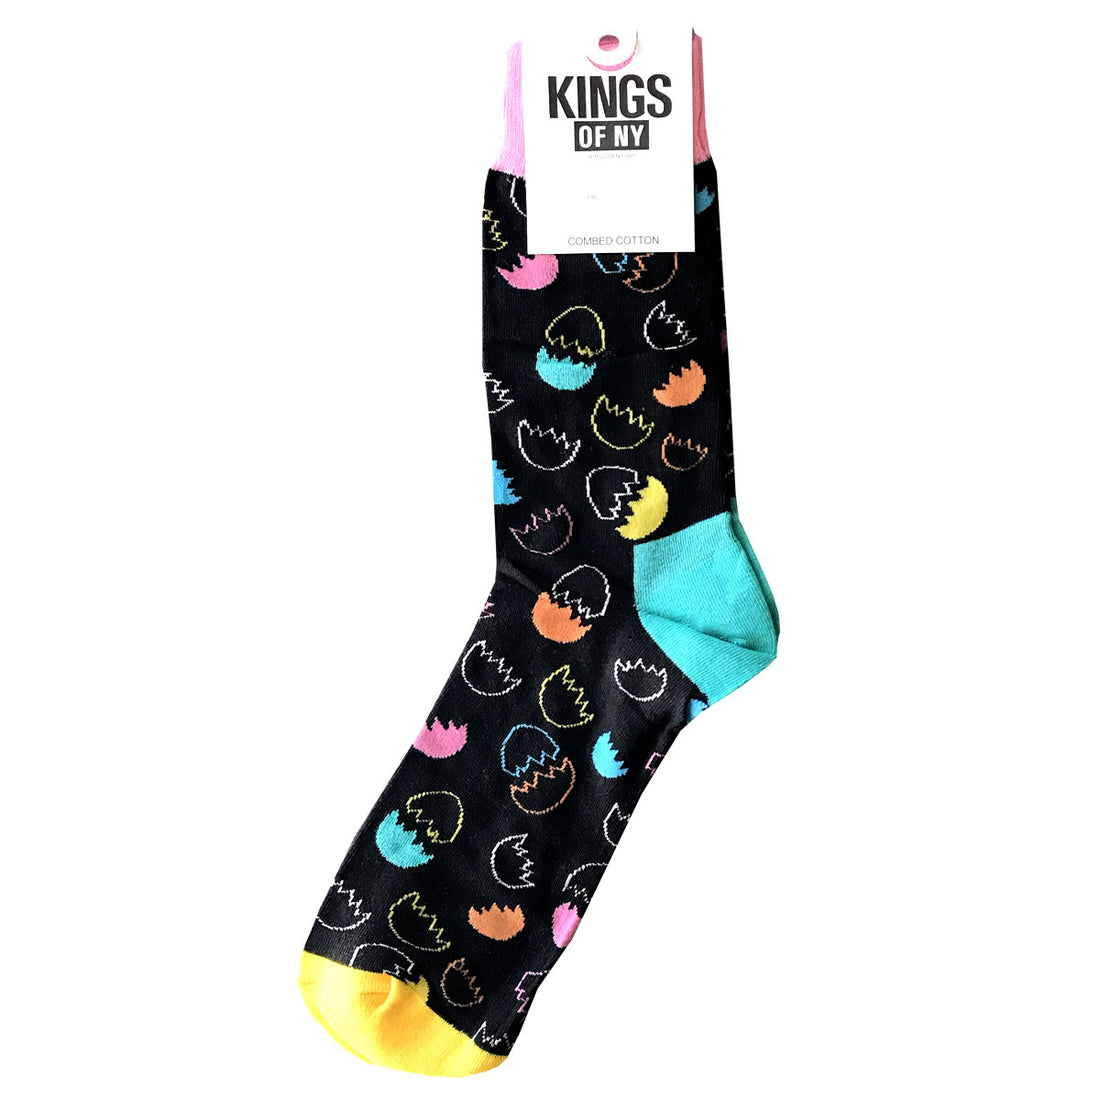 Easter Eggs Holiday Mens Cotton Socks by KINGS OF NY